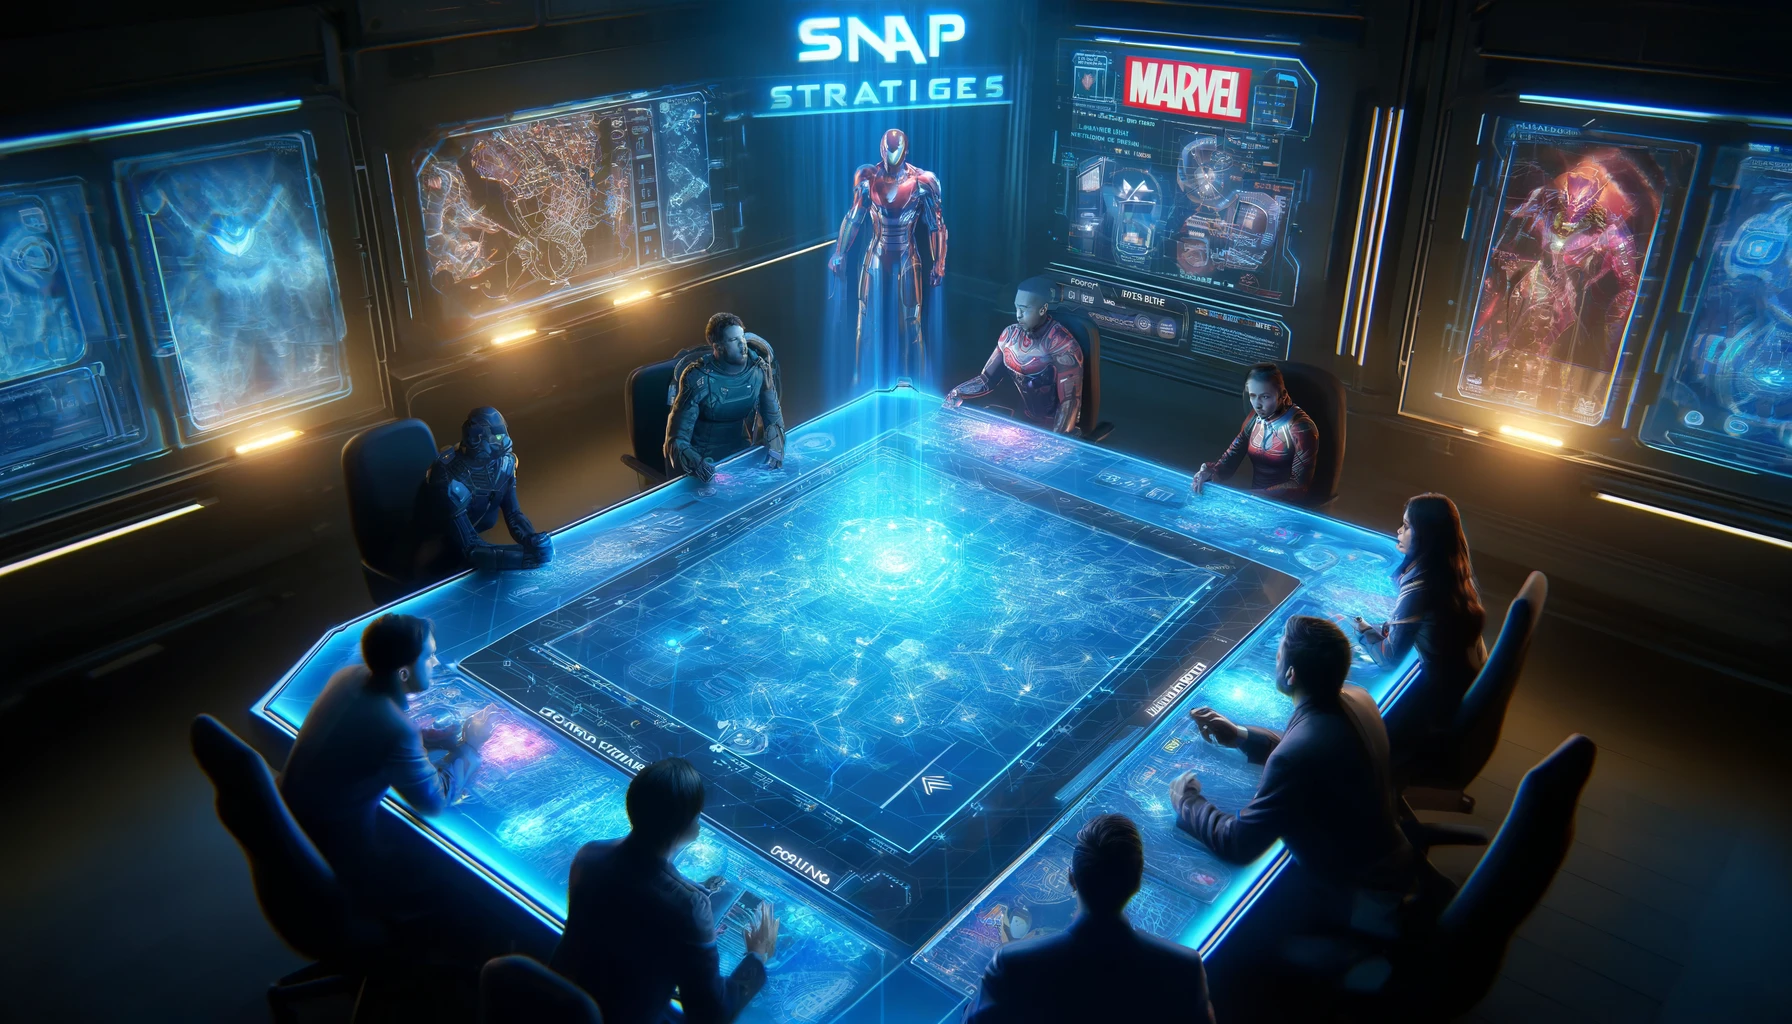 A group of strategists gathers around a futuristic, glowing digital map table in a high-tech environment, discussing Marvel Snap card placements and strategies, emphasizing deep strategic planning and collaboration.